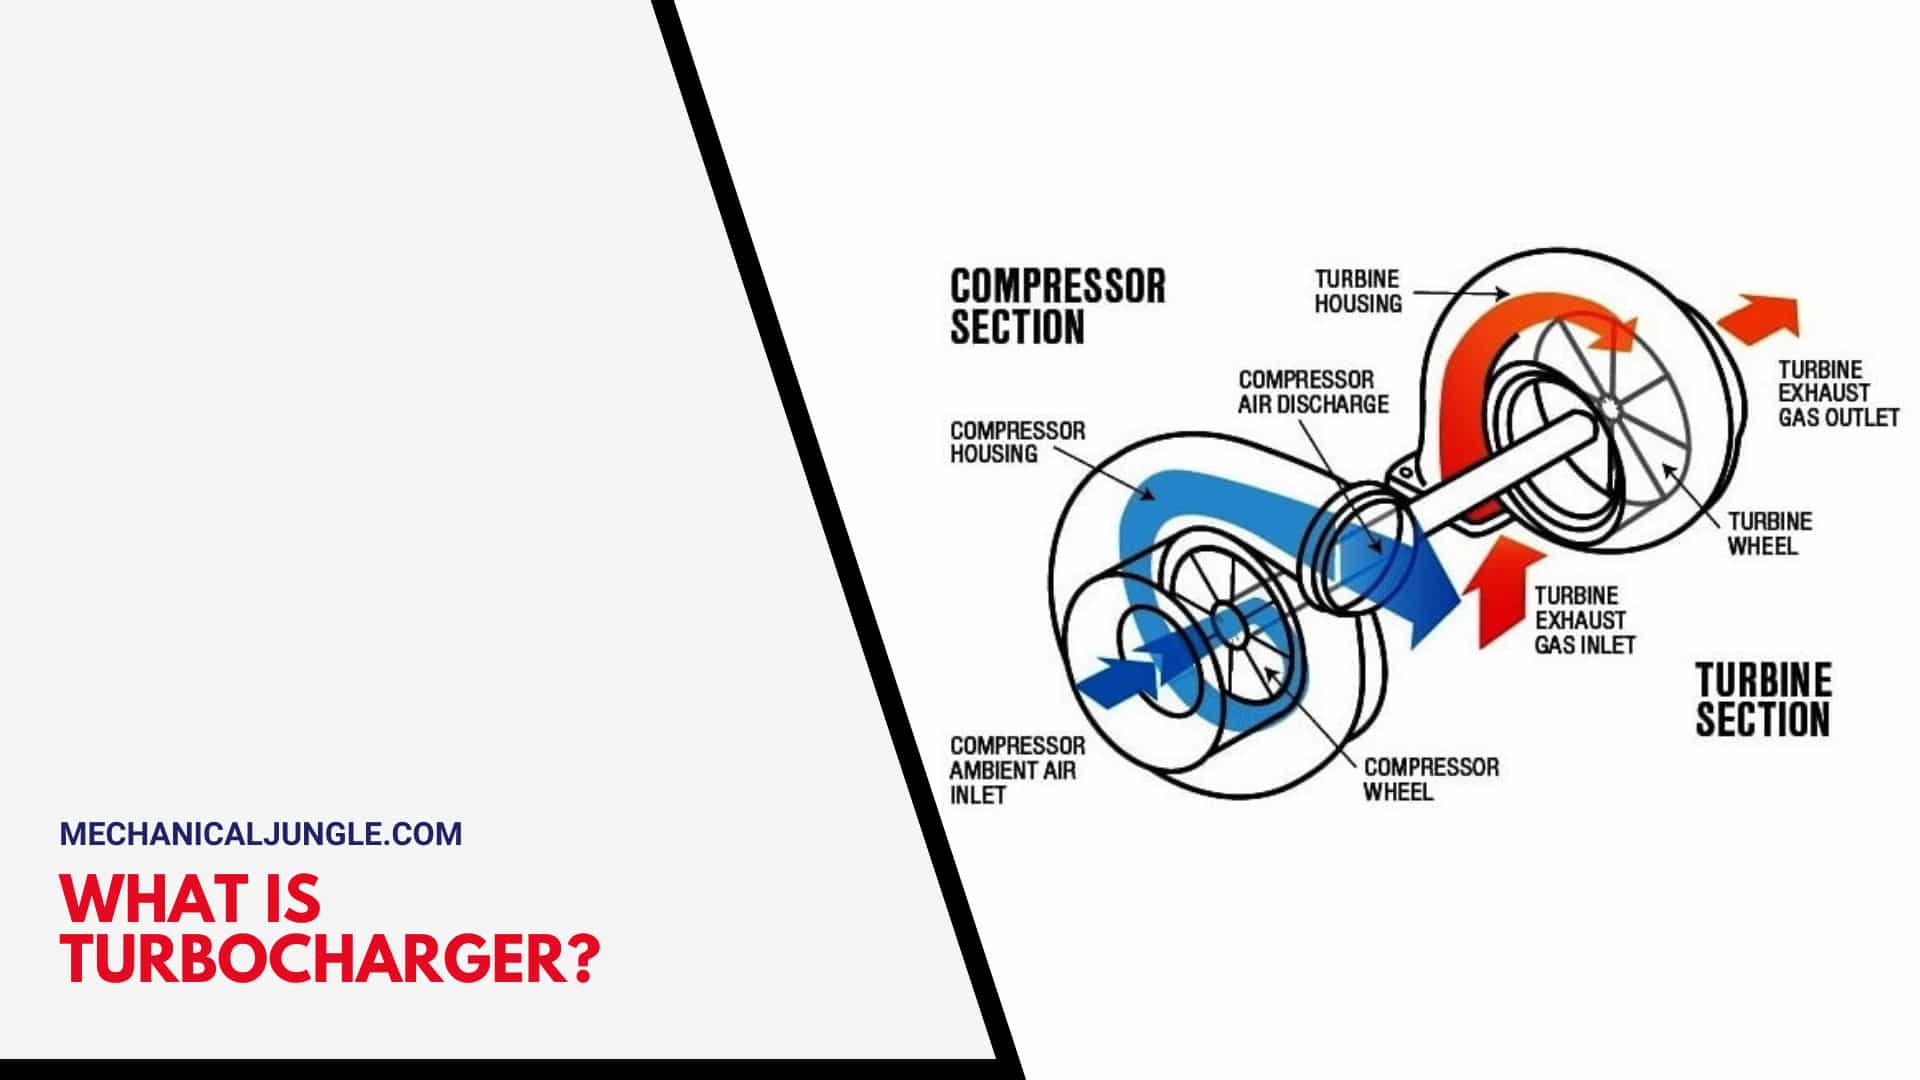 What Is Turbocharger?